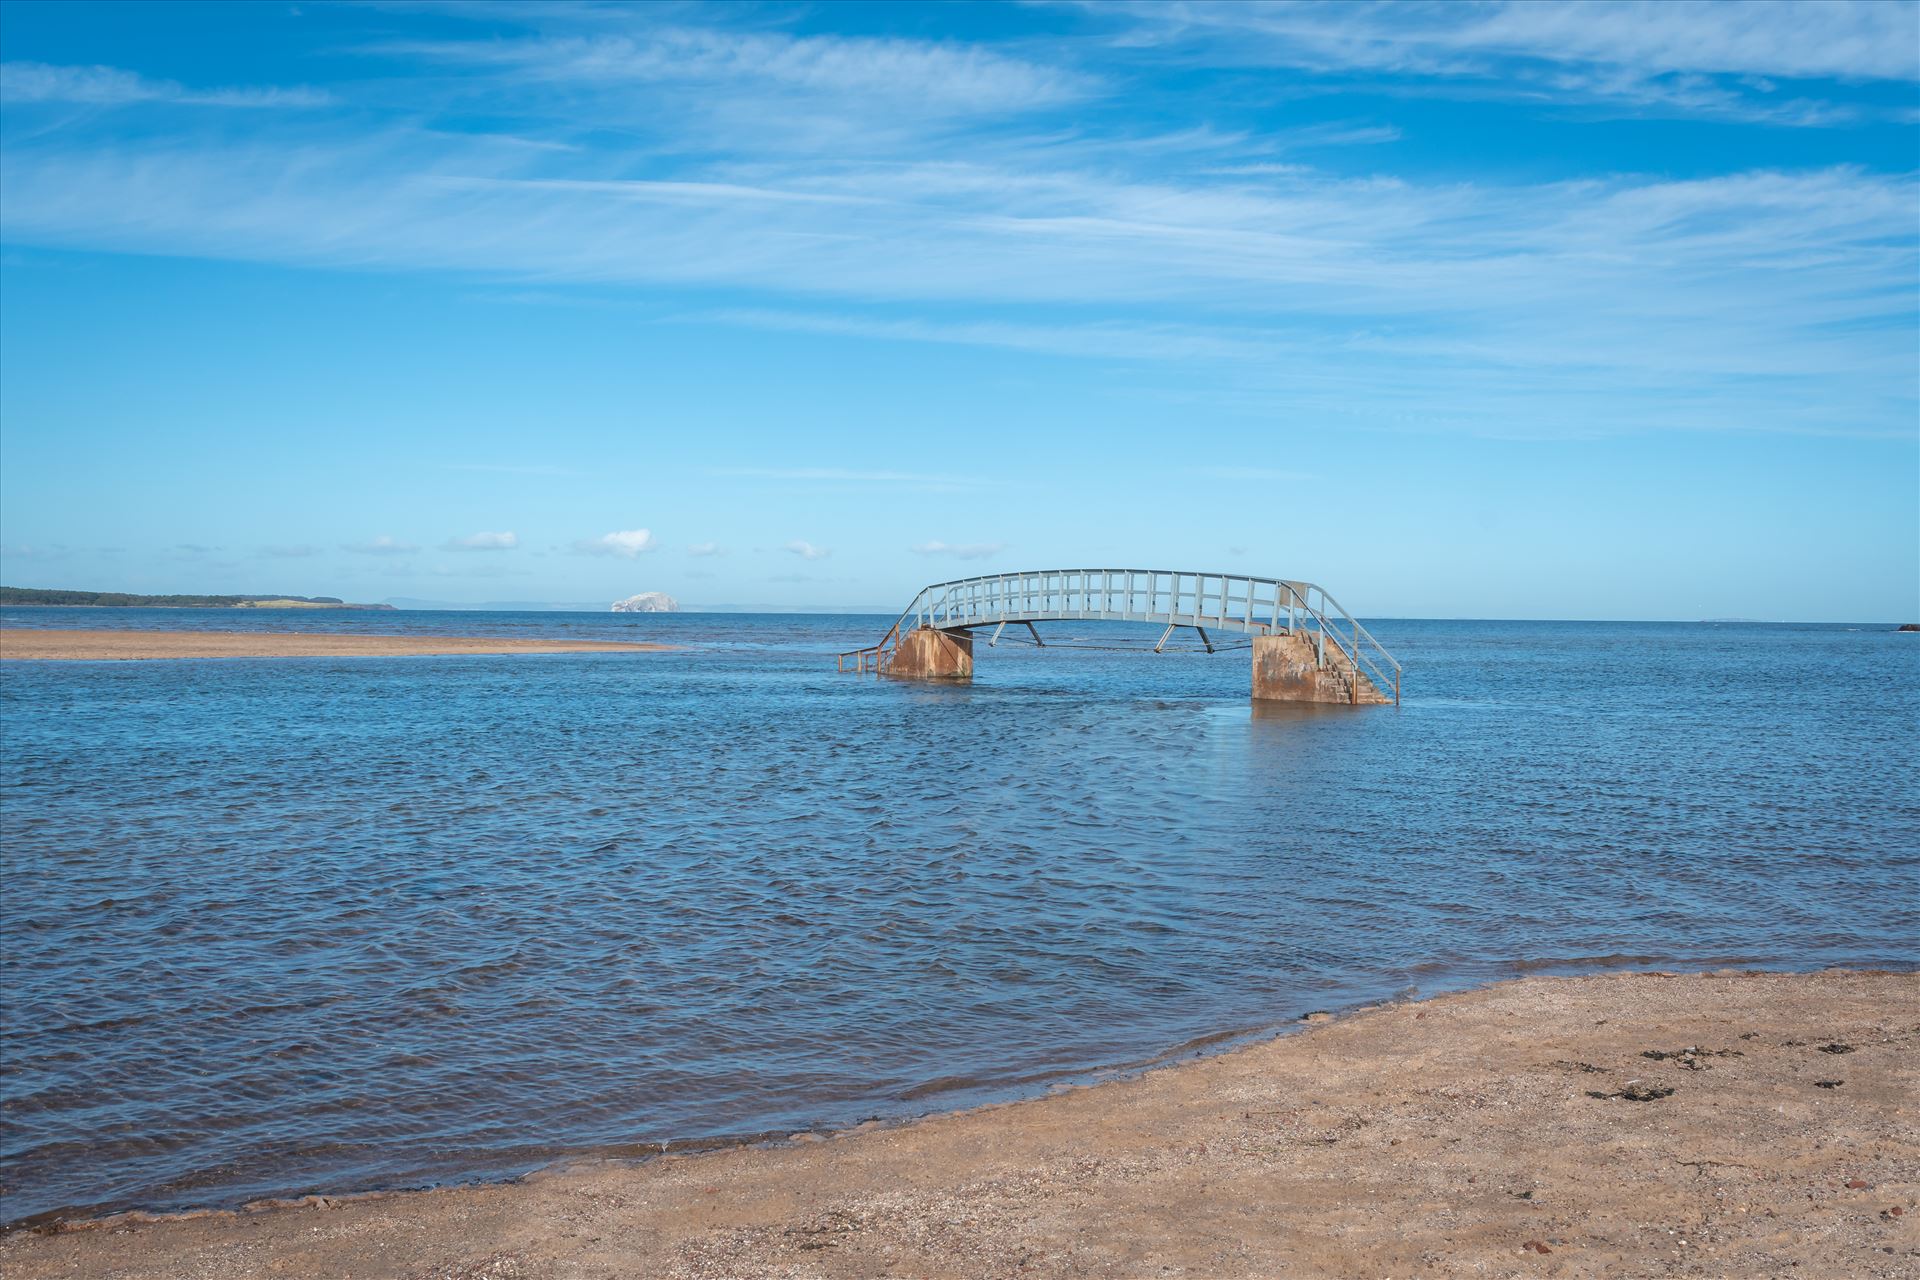 \'Bridge to Nowhere\u2019, Dunbar, Scotland - When the tide comes surging into shore, what should be an easy path to the beach becomes suddenly impassable. At high tide, the water swallows the land around the bridge, making it look as though it’s stranded in the middle of a sea. by Graham Dobson Photography